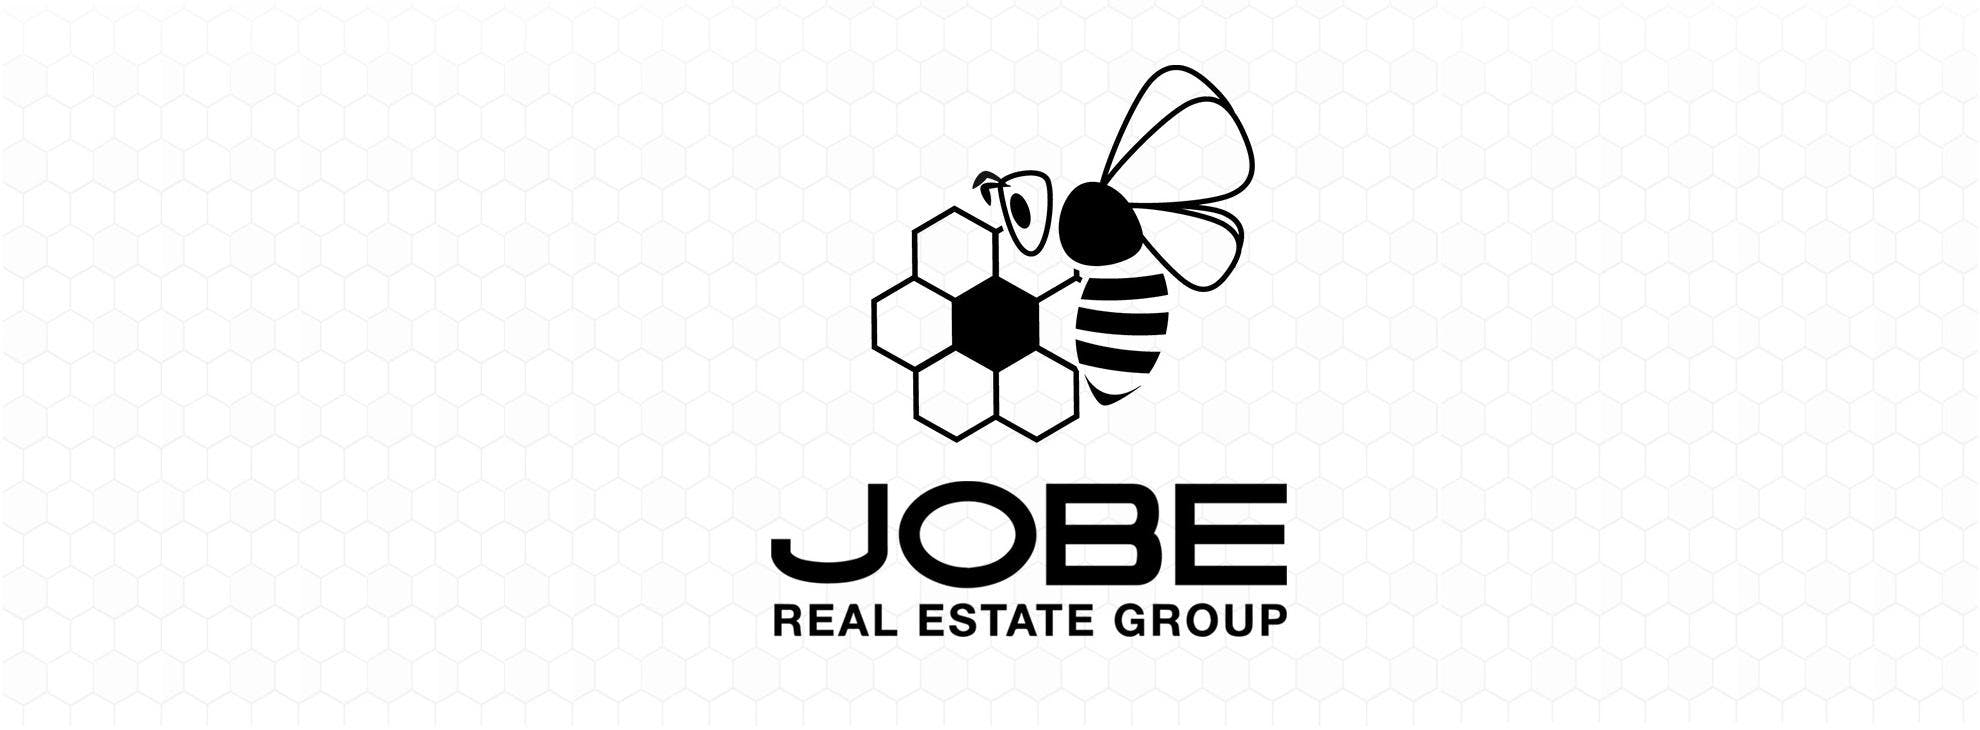 Copy of Come LAUNCH your Real Estate Business with The JOBE Group!